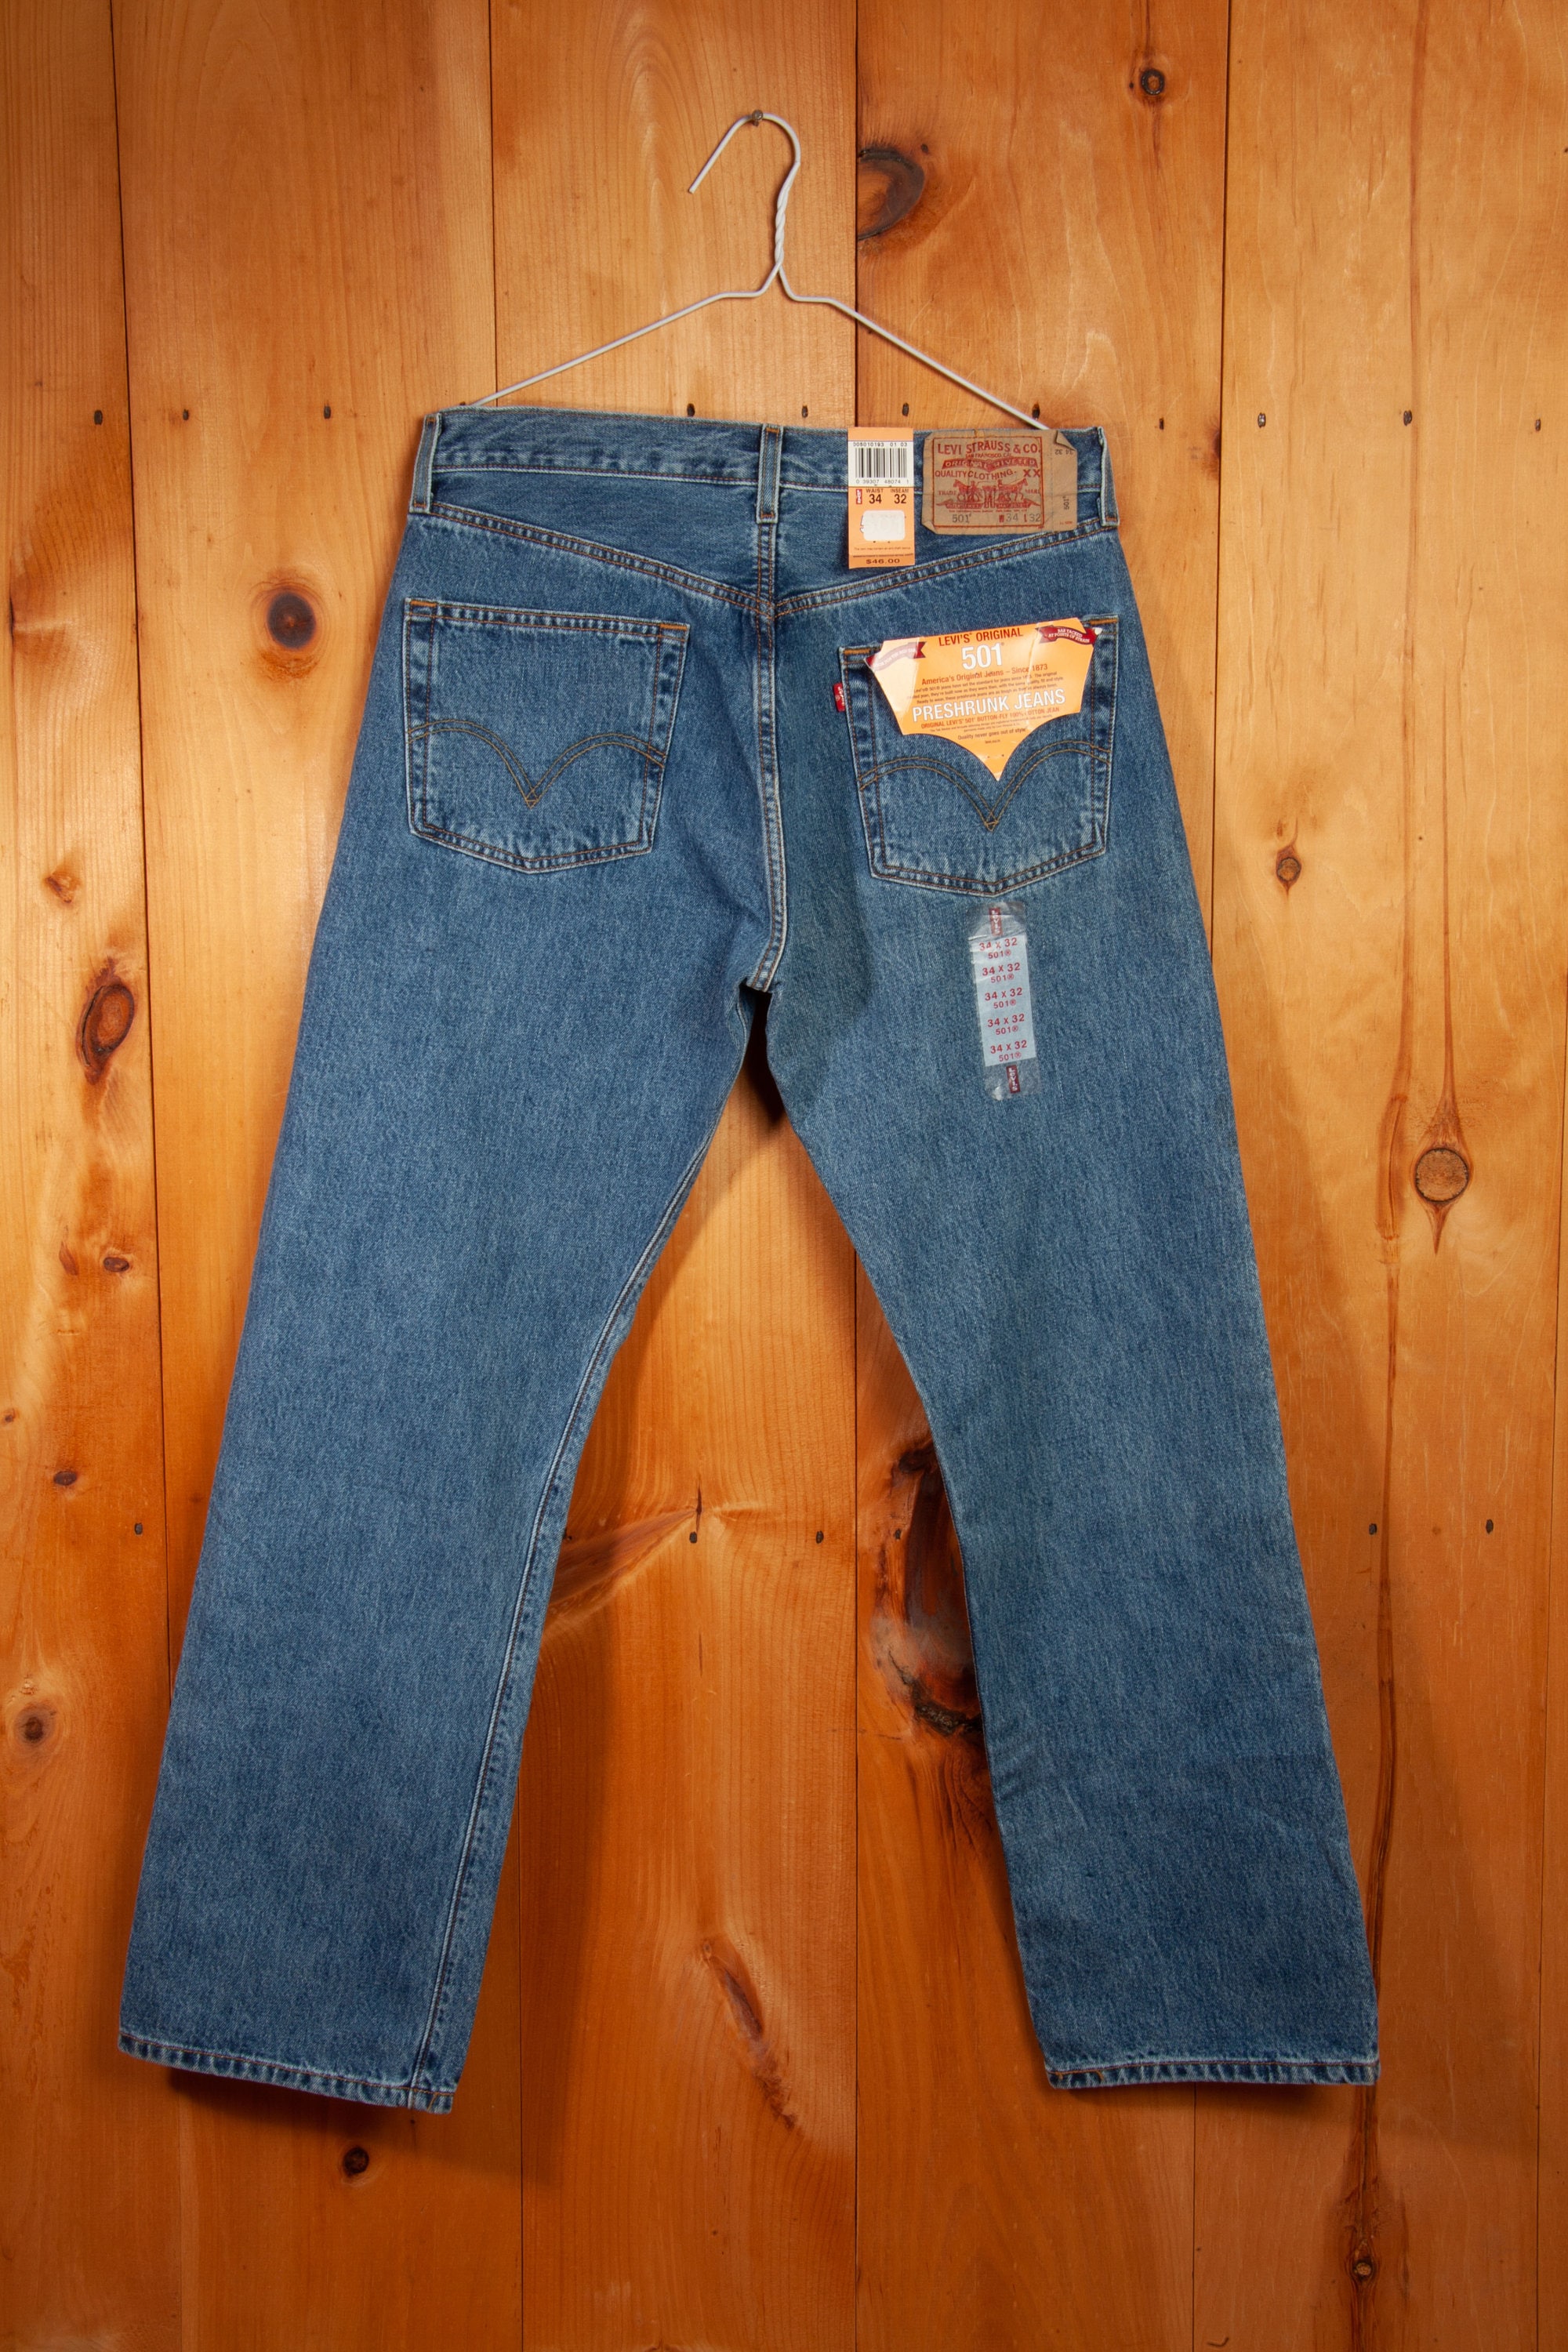 Vintage Levis 501 Jeans Deadstock with Original Tags 34 X 32 - Etsy